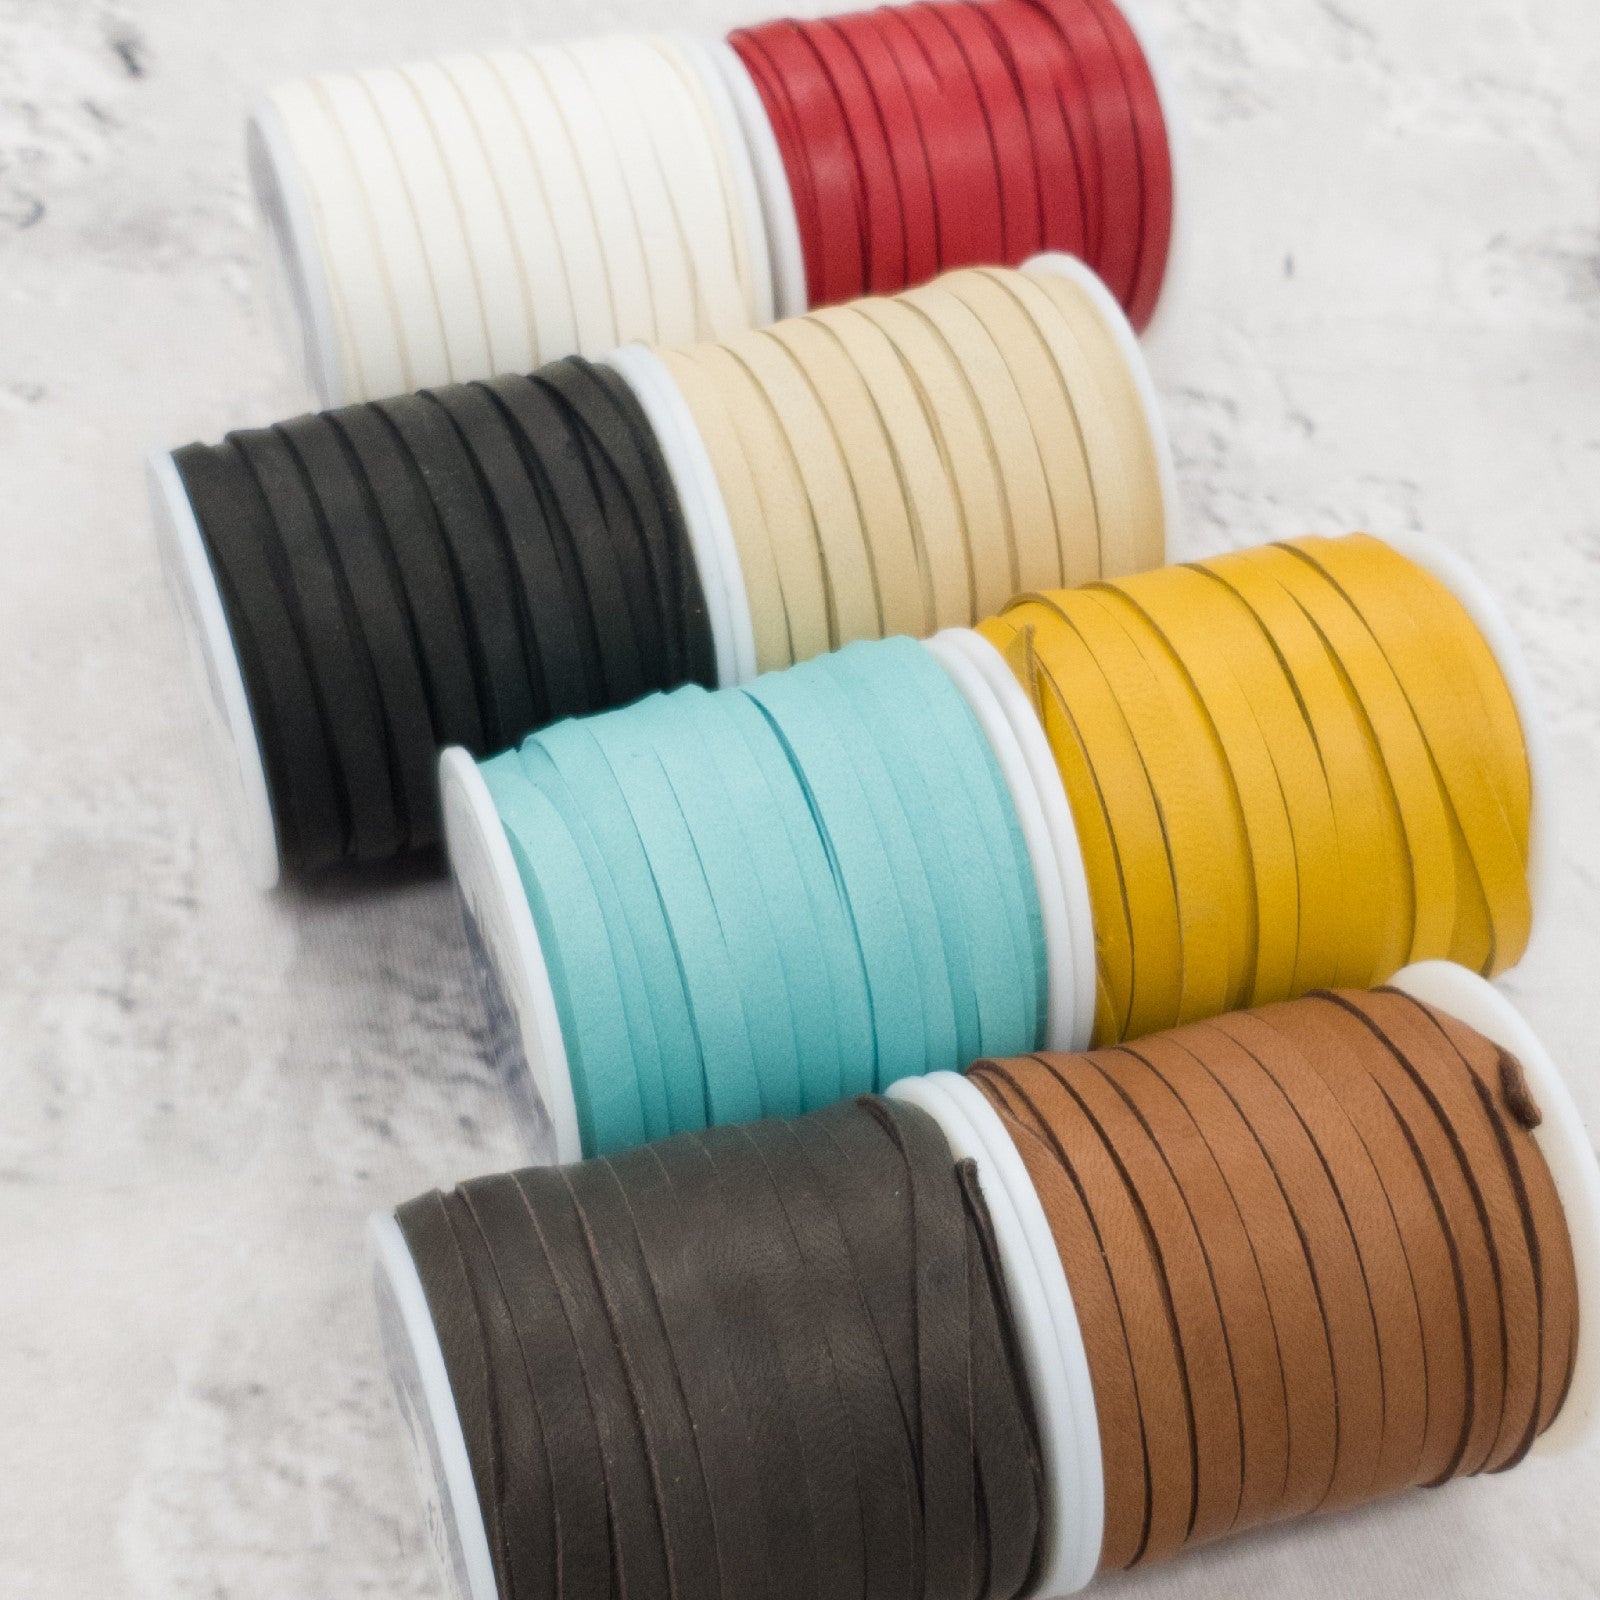 20 Mm Colorfull Leather Sewing Tape, Leather Bias Tape, Sewing